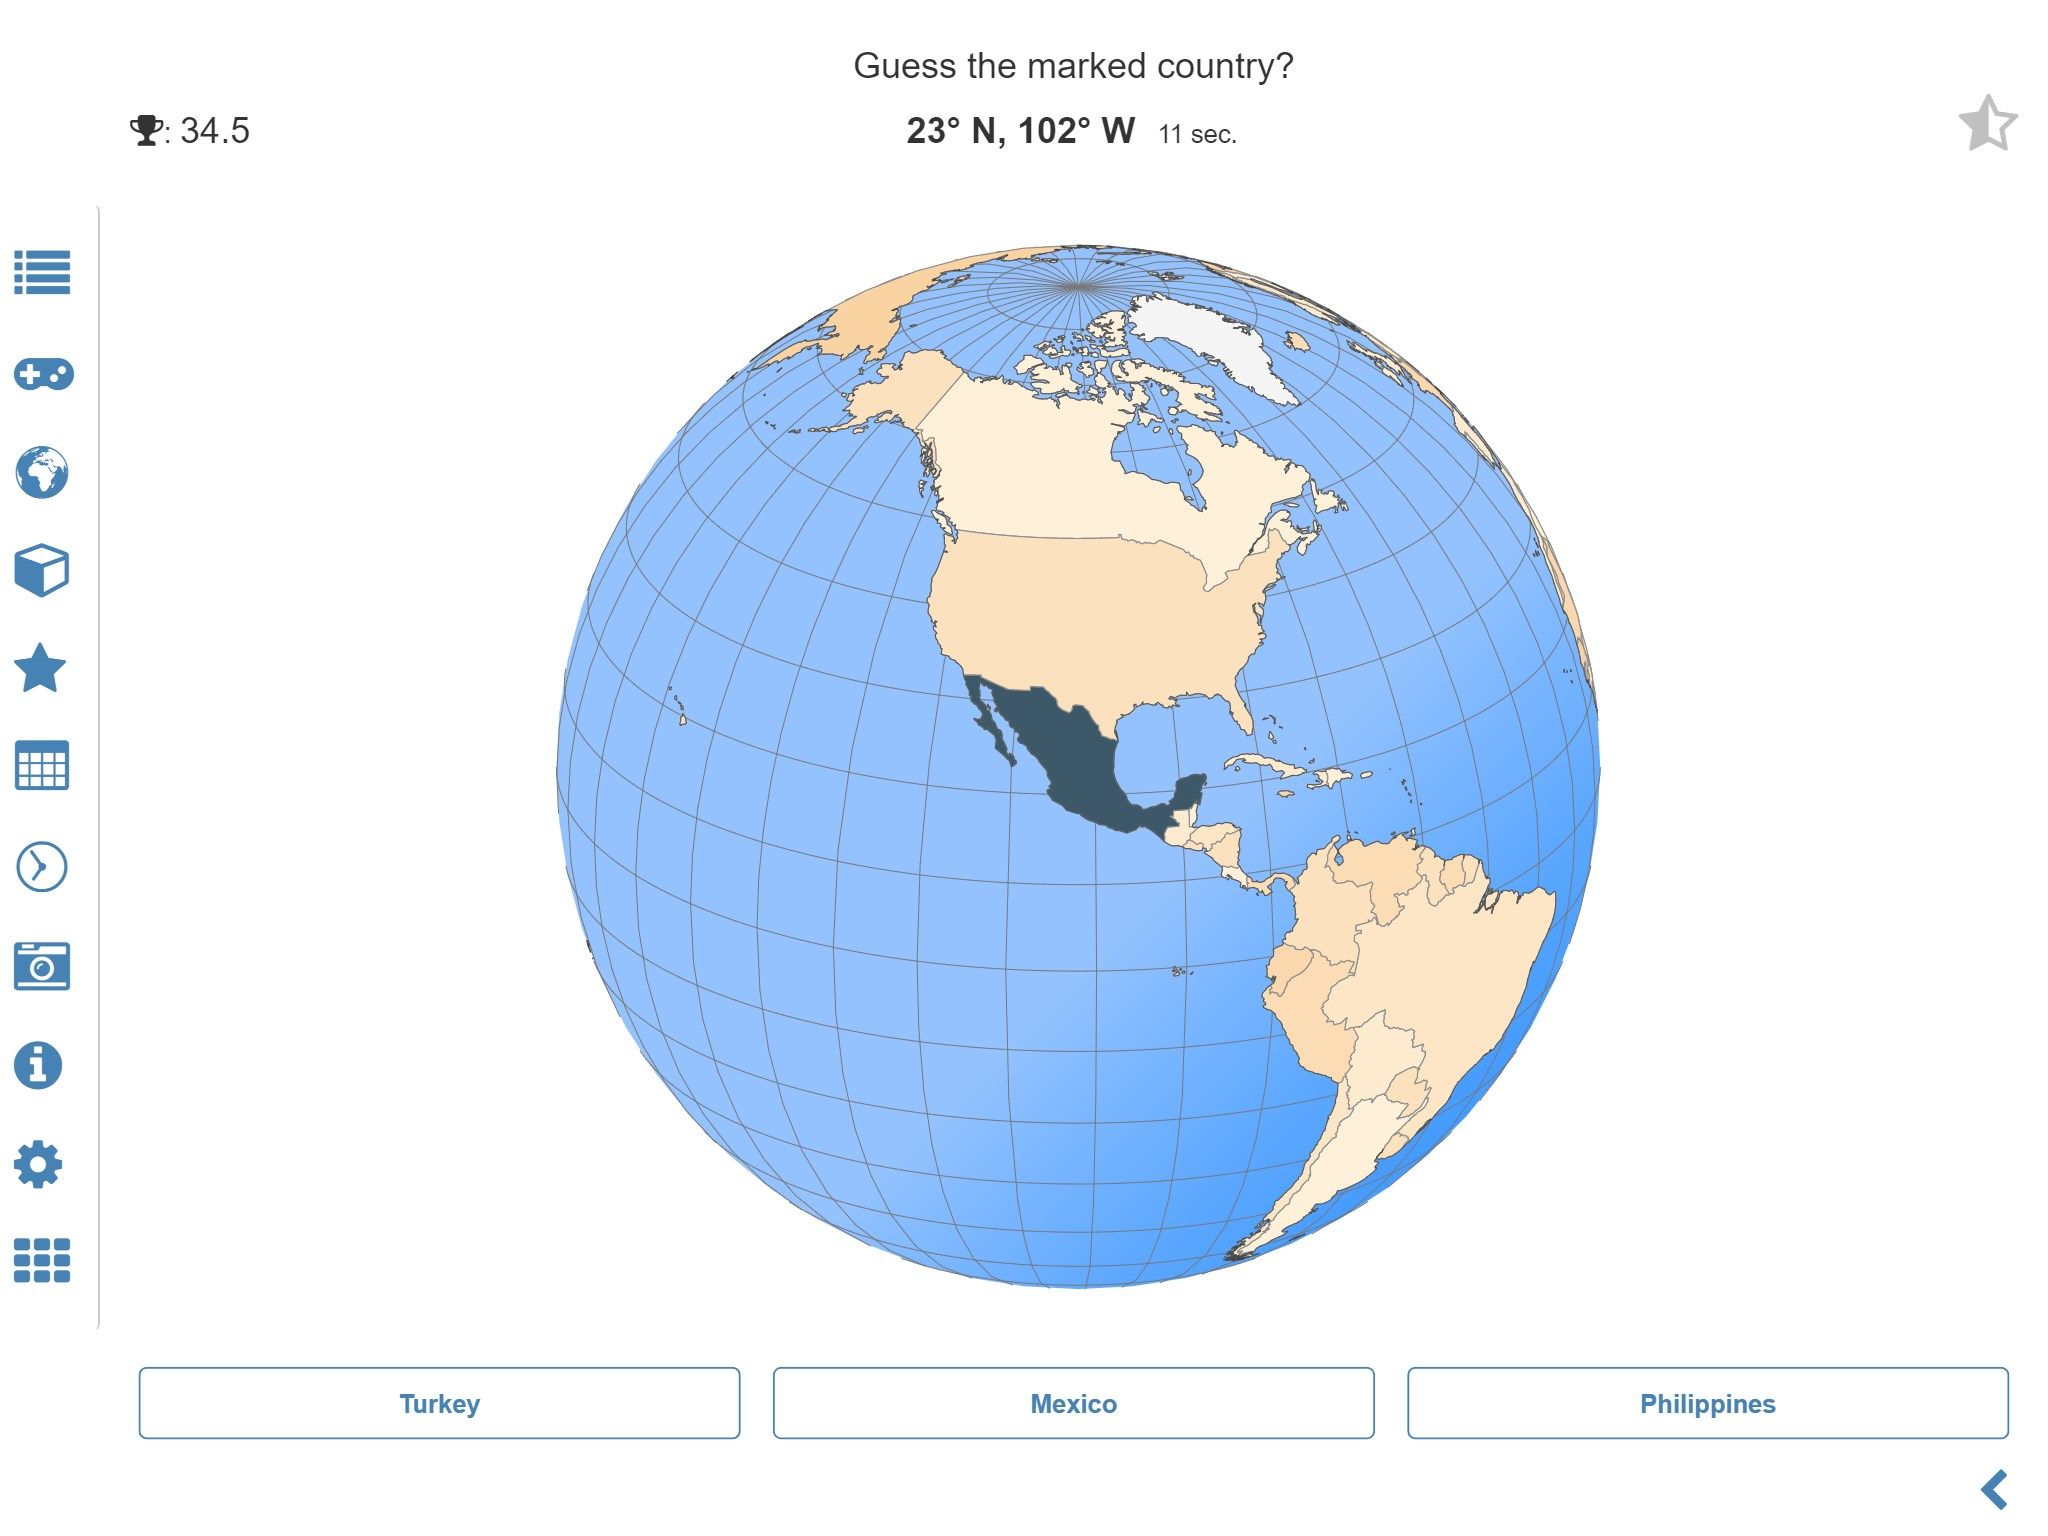 Geography quiz challenges for playful learning: guess the marked country on the virtual globe, test your knowledge about the countries flags